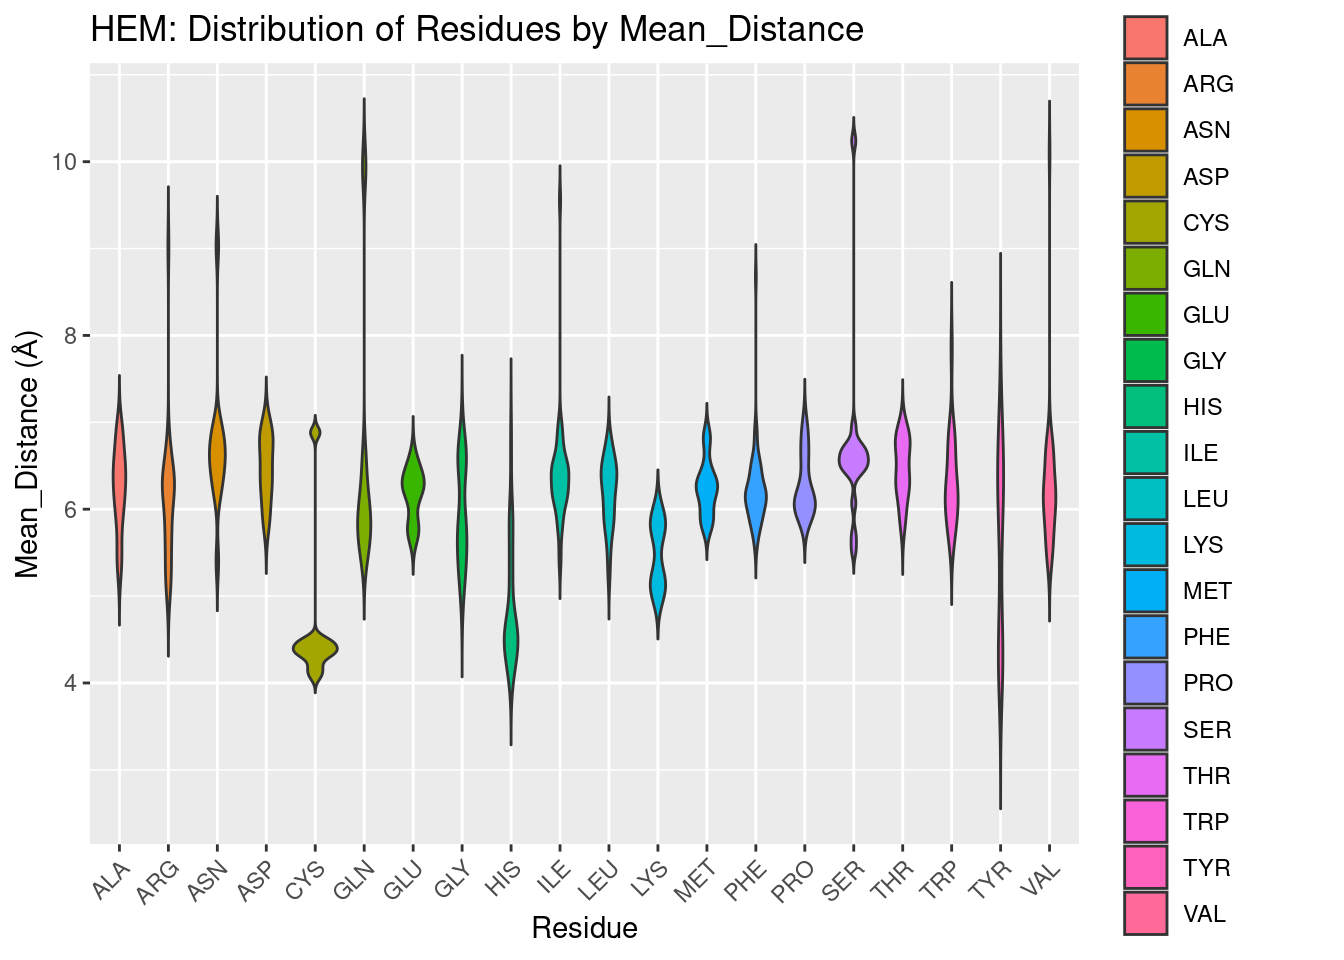 HEM: Residue Distribution by Distance